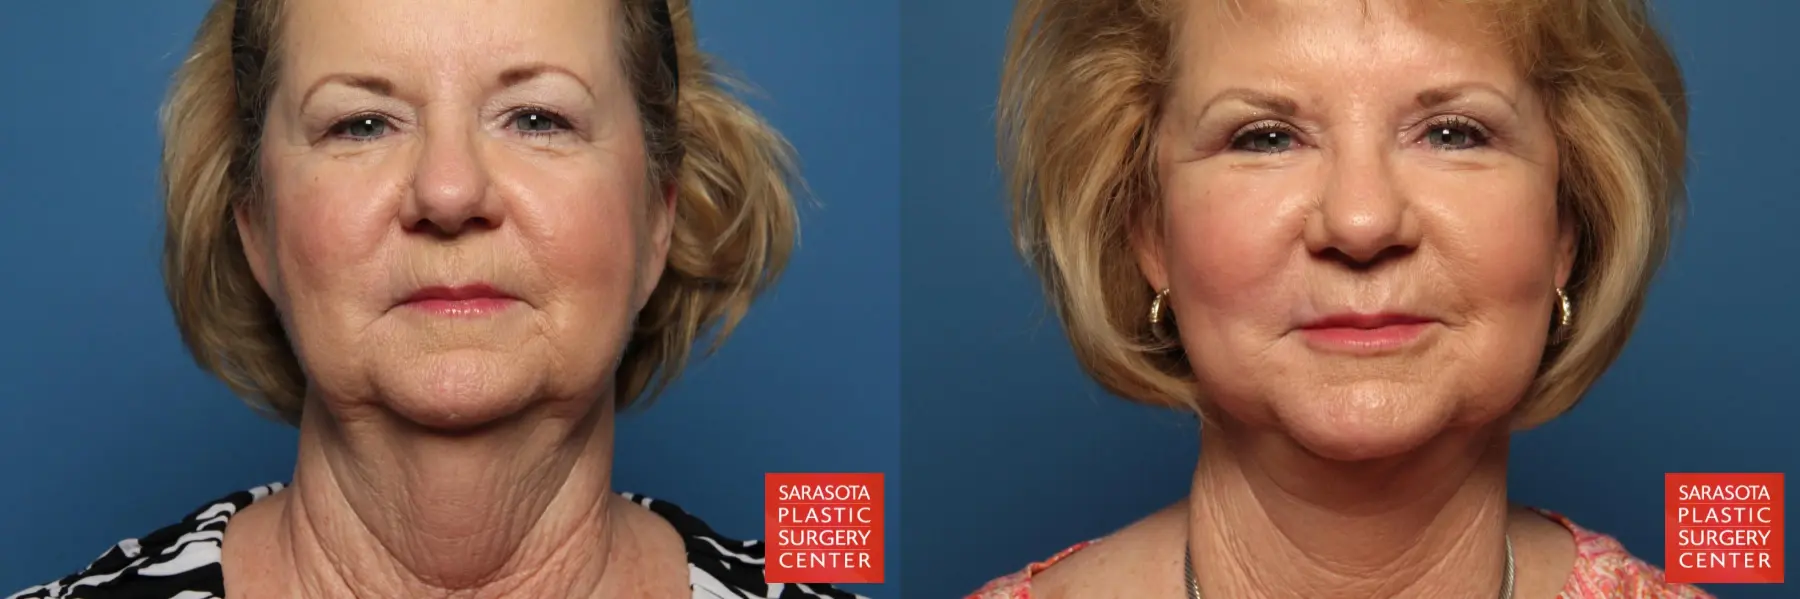 Facelift: Patient 11 - Before and After 1